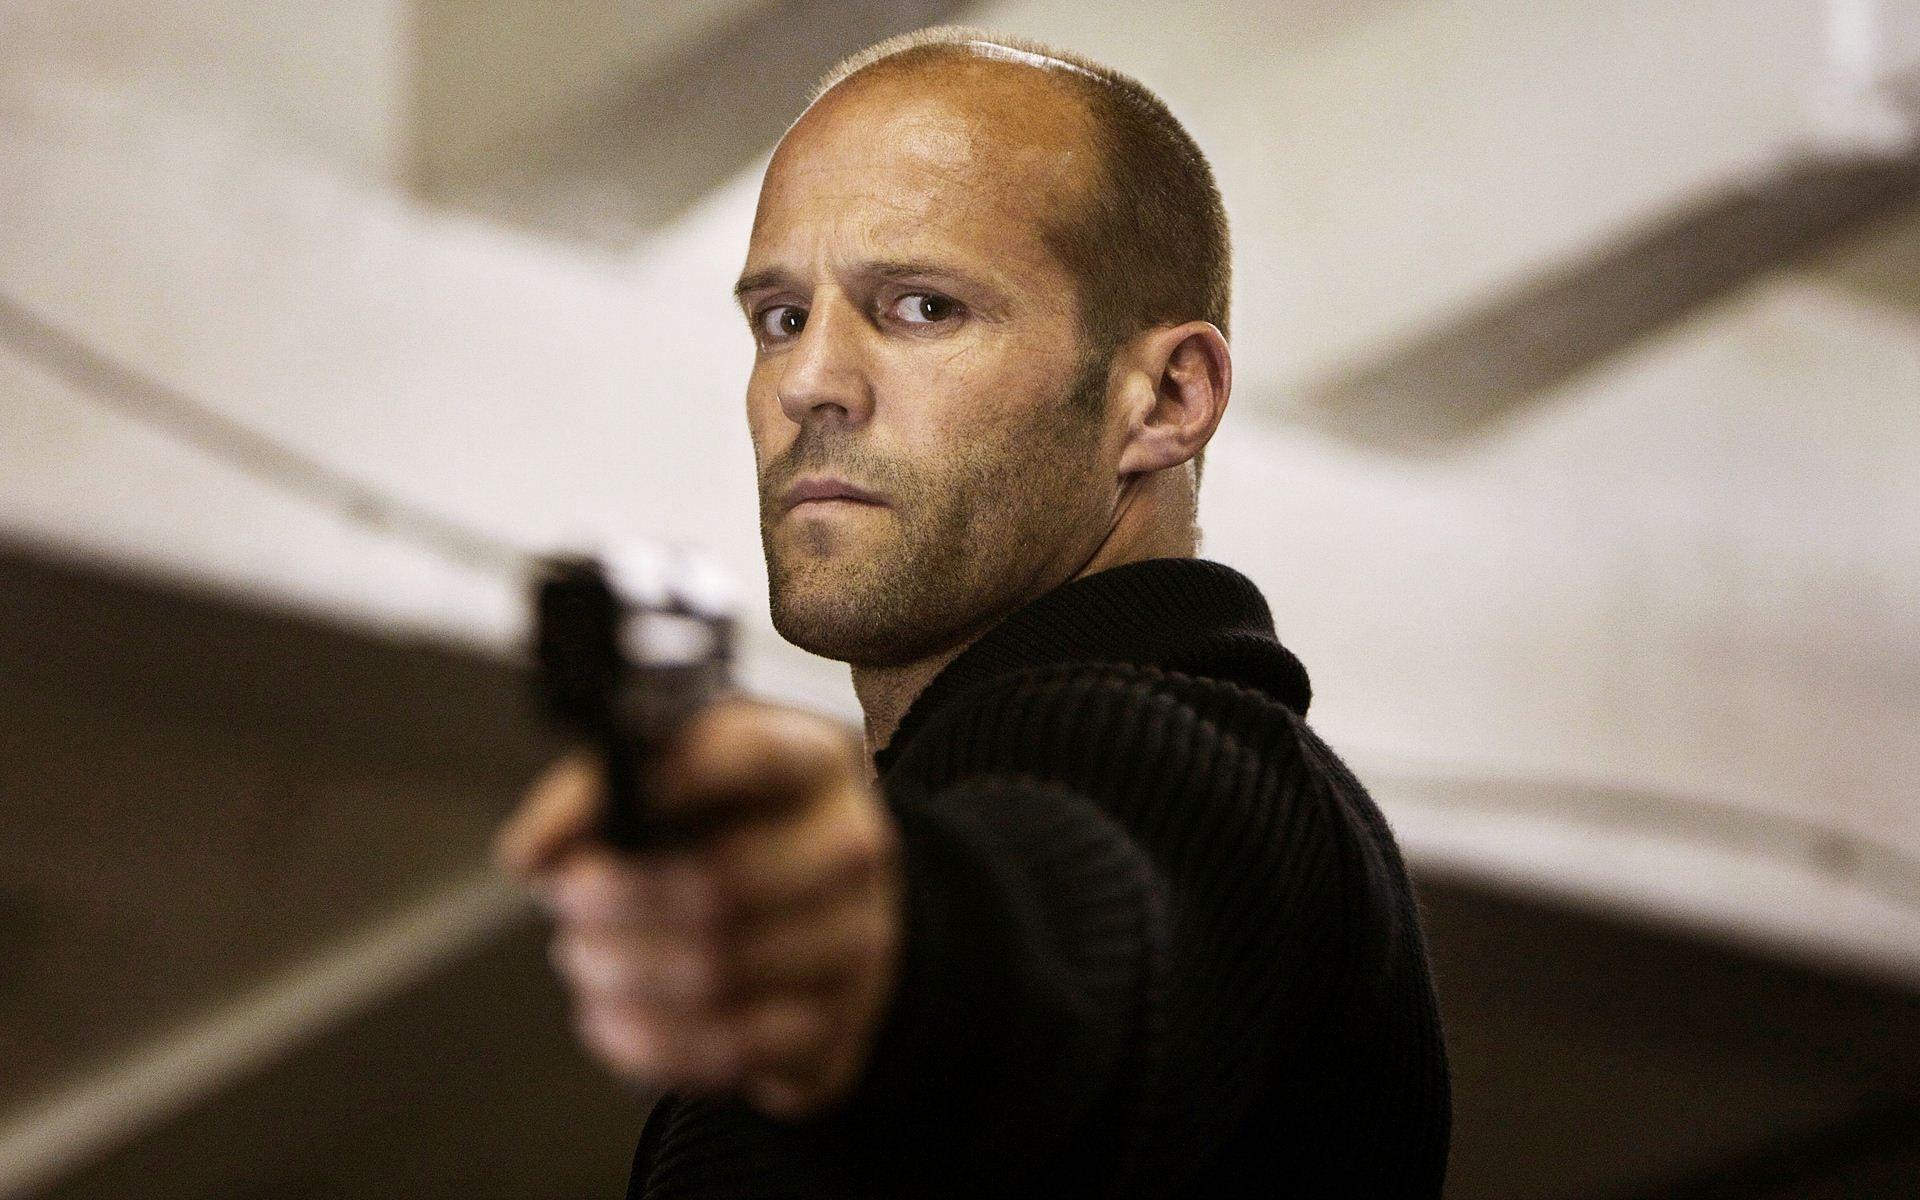 Jason Statham Wallpaper High Resolution and Quality Download